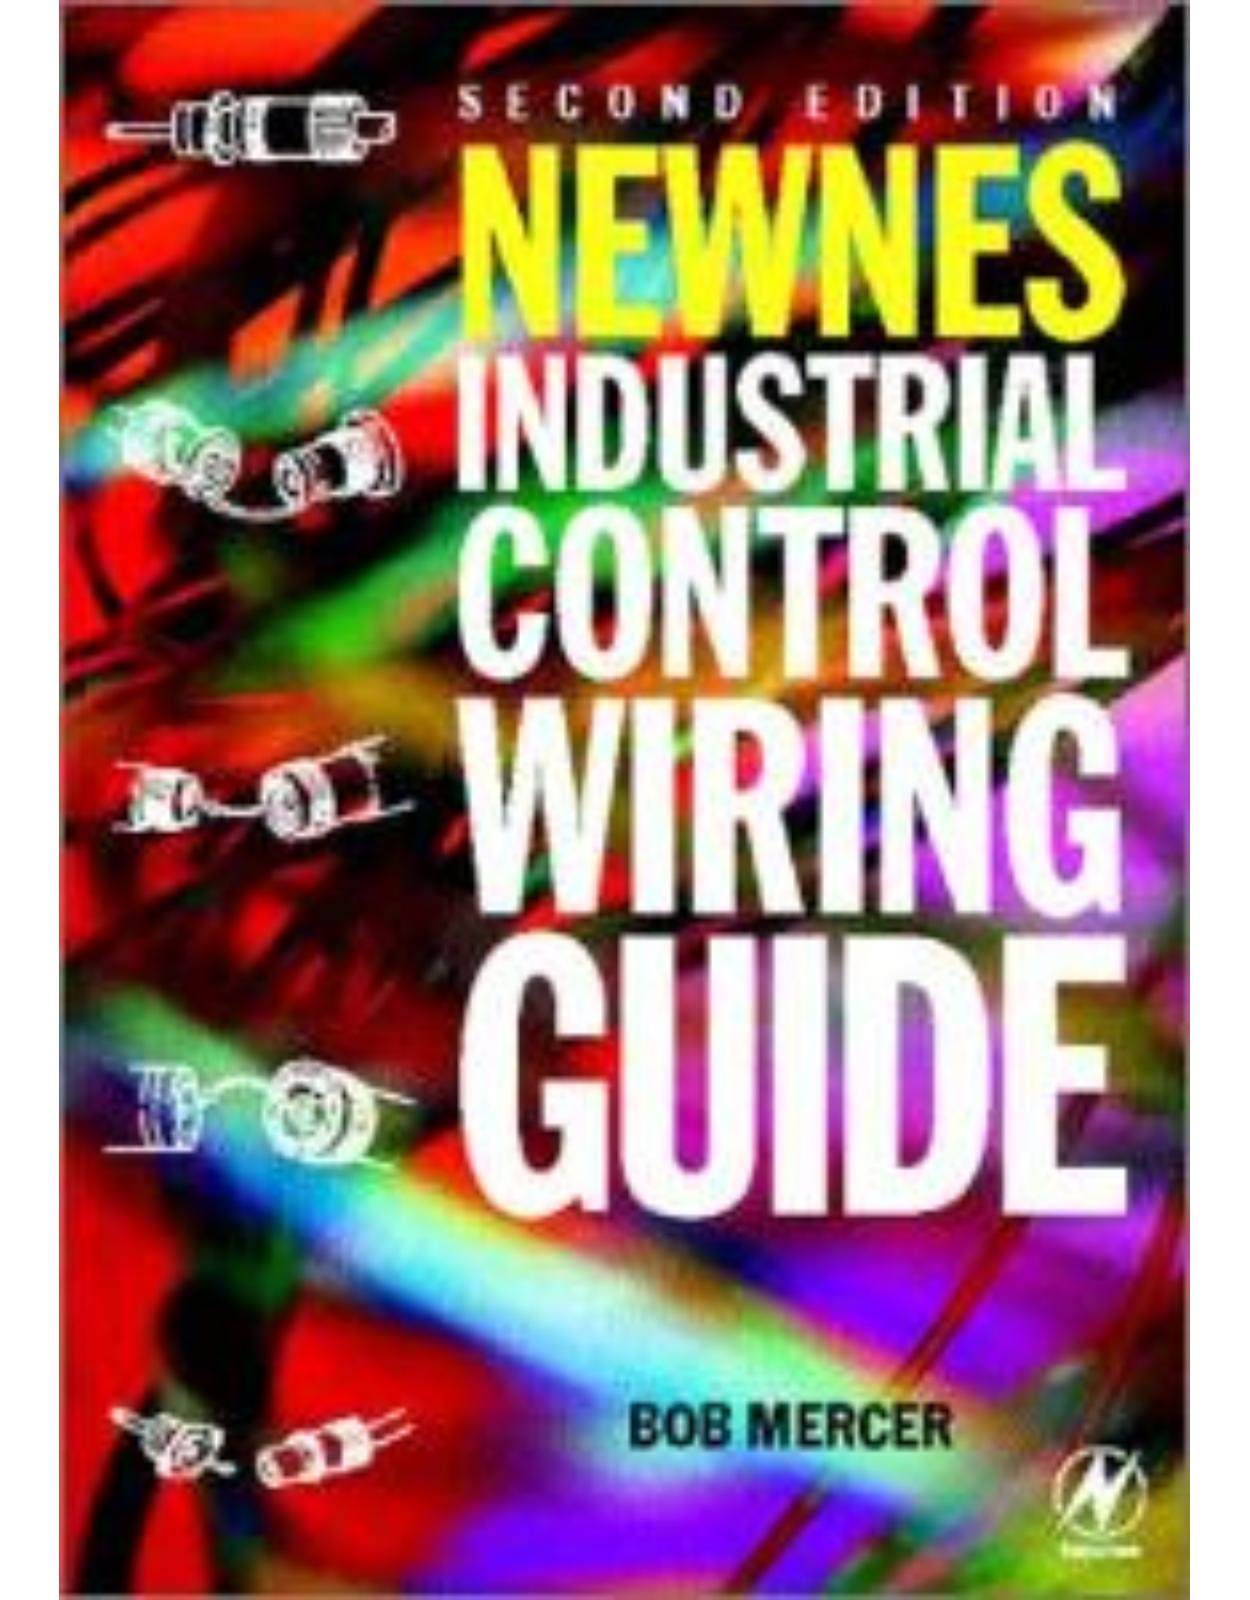 Newnes Industrial Control Wiring Guide